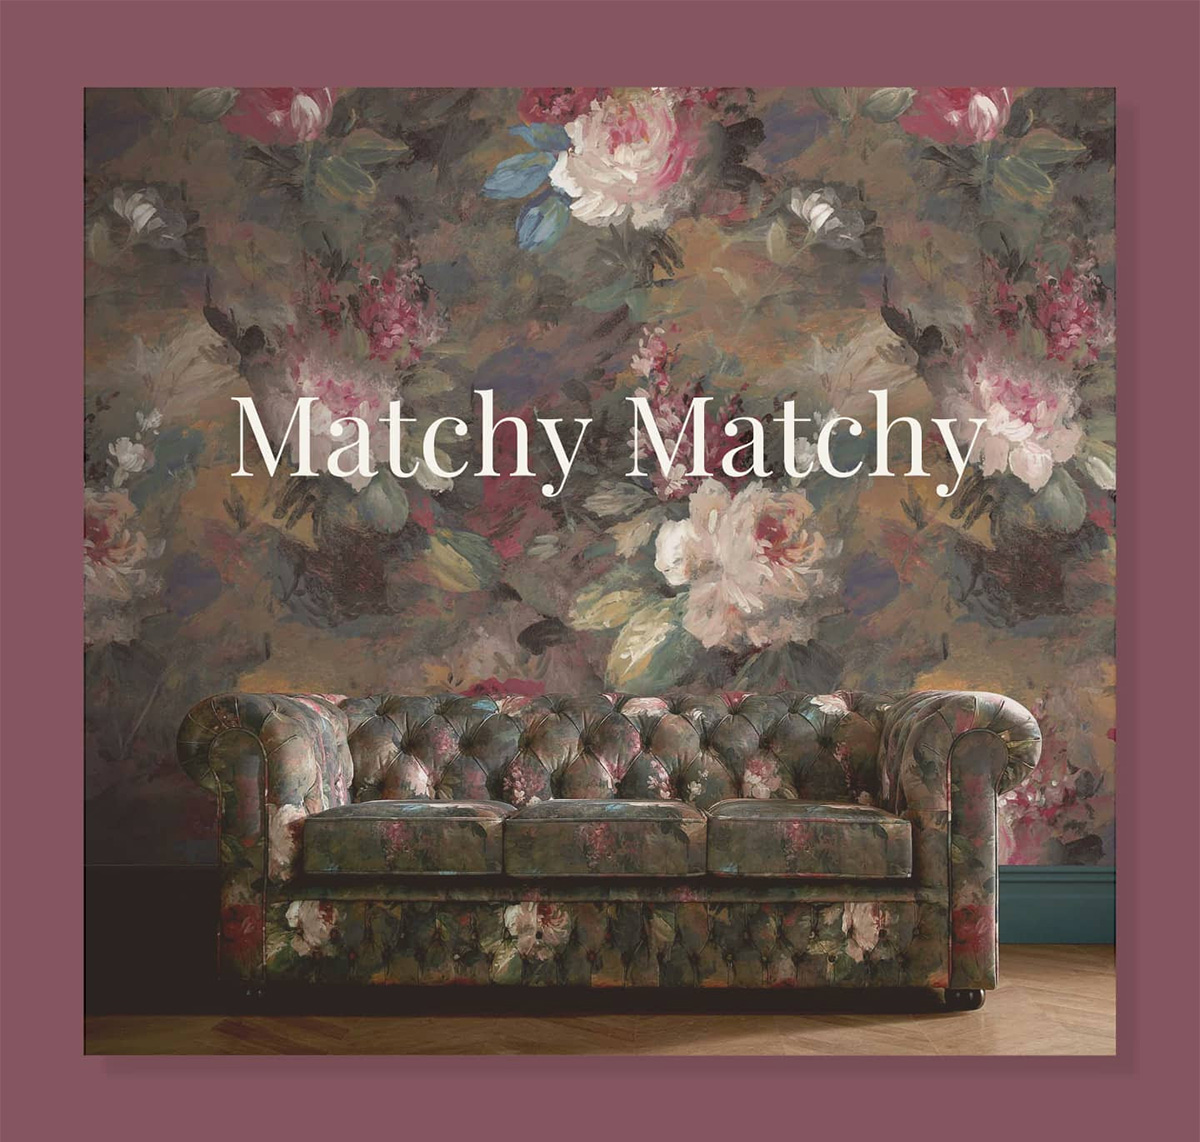 A photo of Woodchip & Magnolia's wallpaper matching the fabric on the sofa.